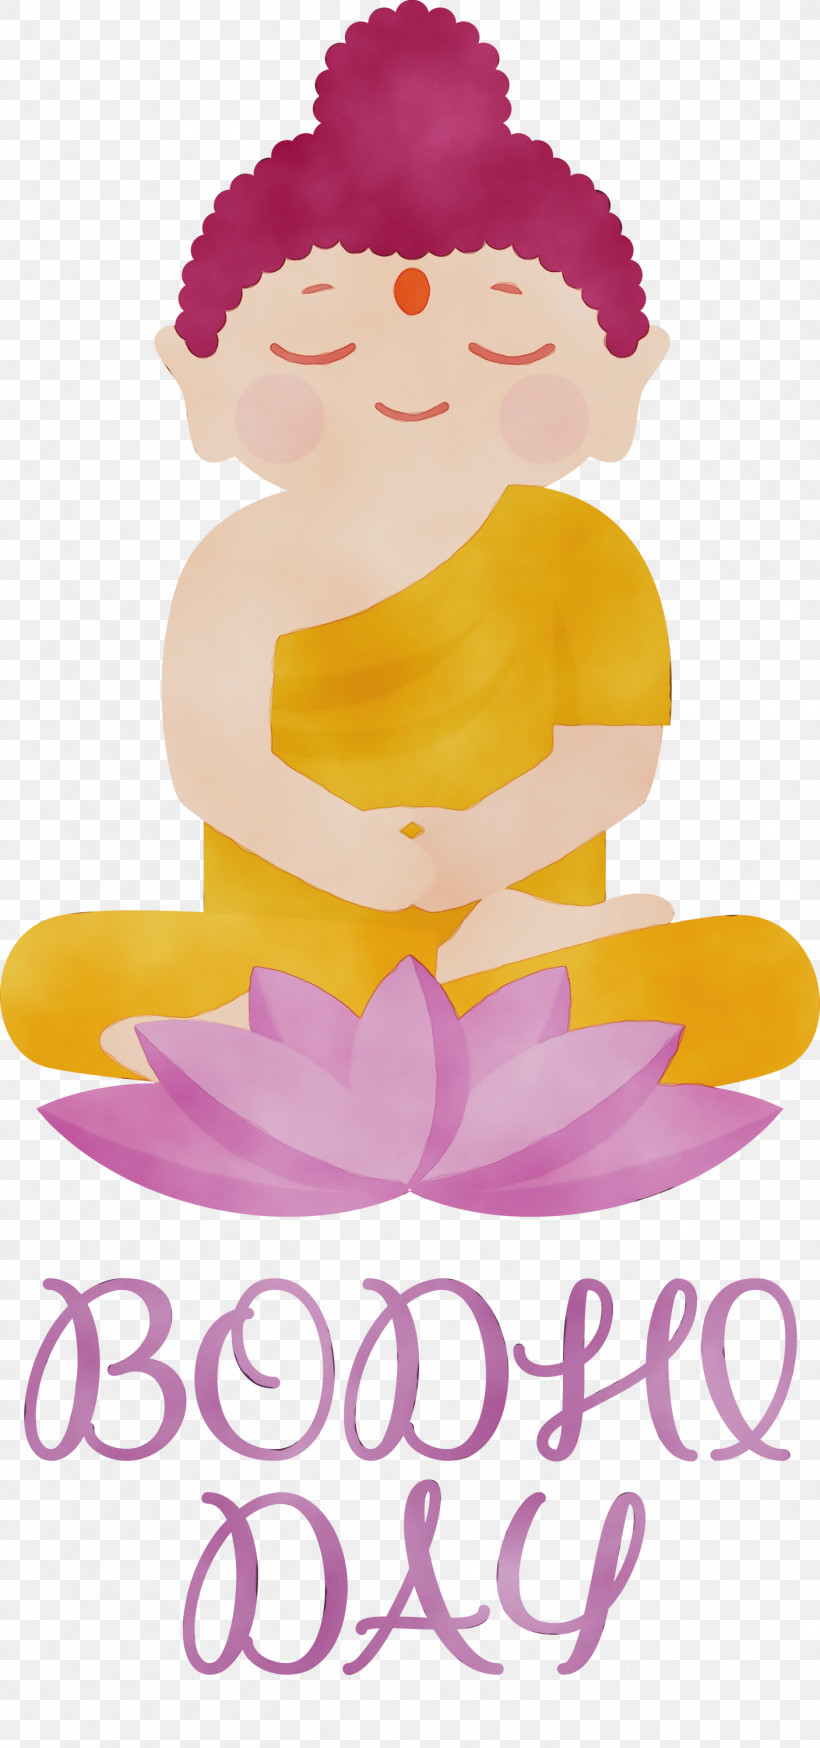 Cartoon Character Petal Flower Happiness, PNG, 1407x3000px, Bodhi Day, Cartoon, Character, Flower, Happiness Download Free